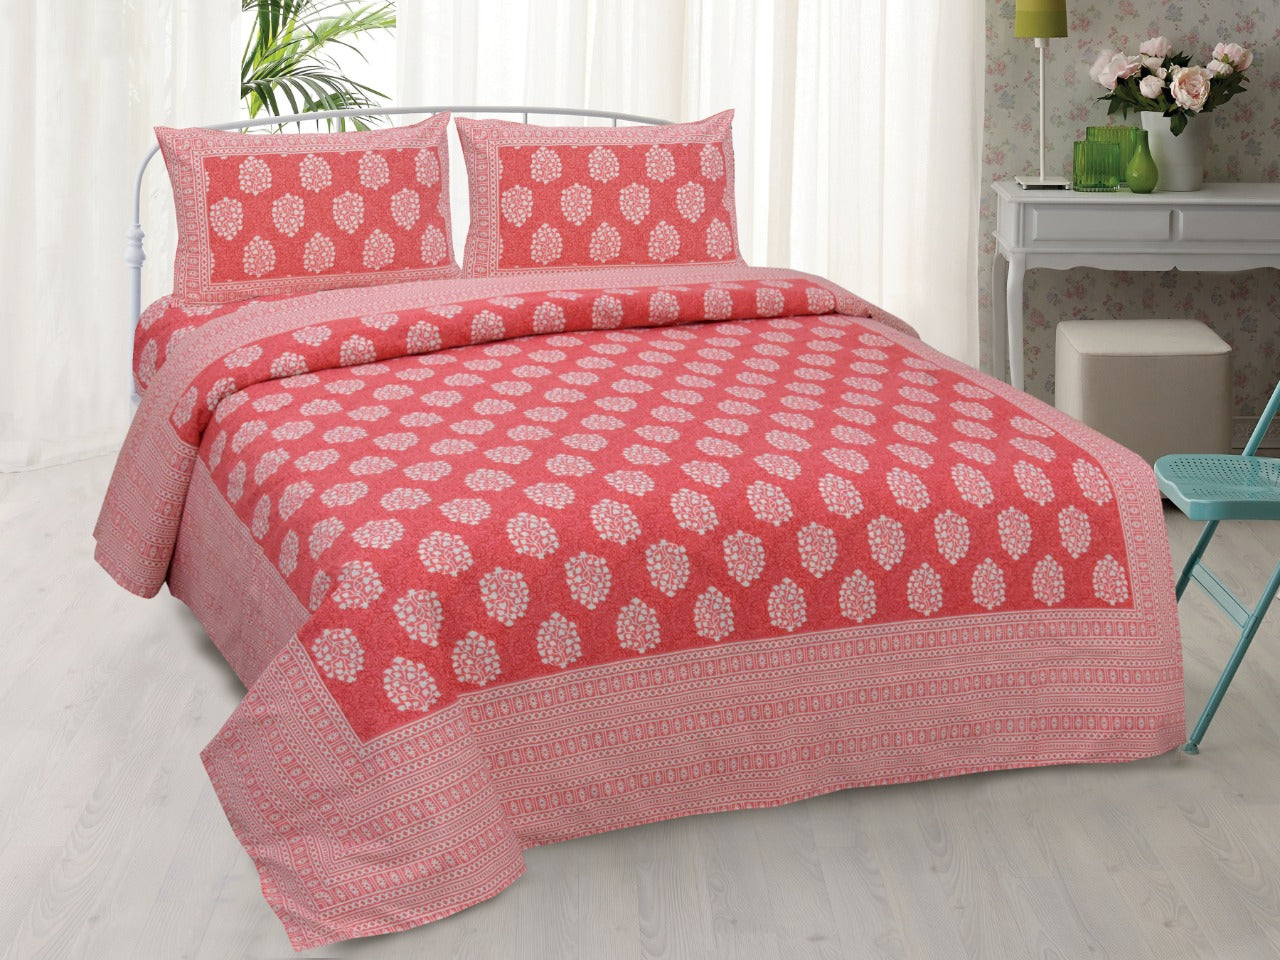 Red colored Jaipuri Bagru Hand Block Printed Double Bedsheets with stitched pillow cover